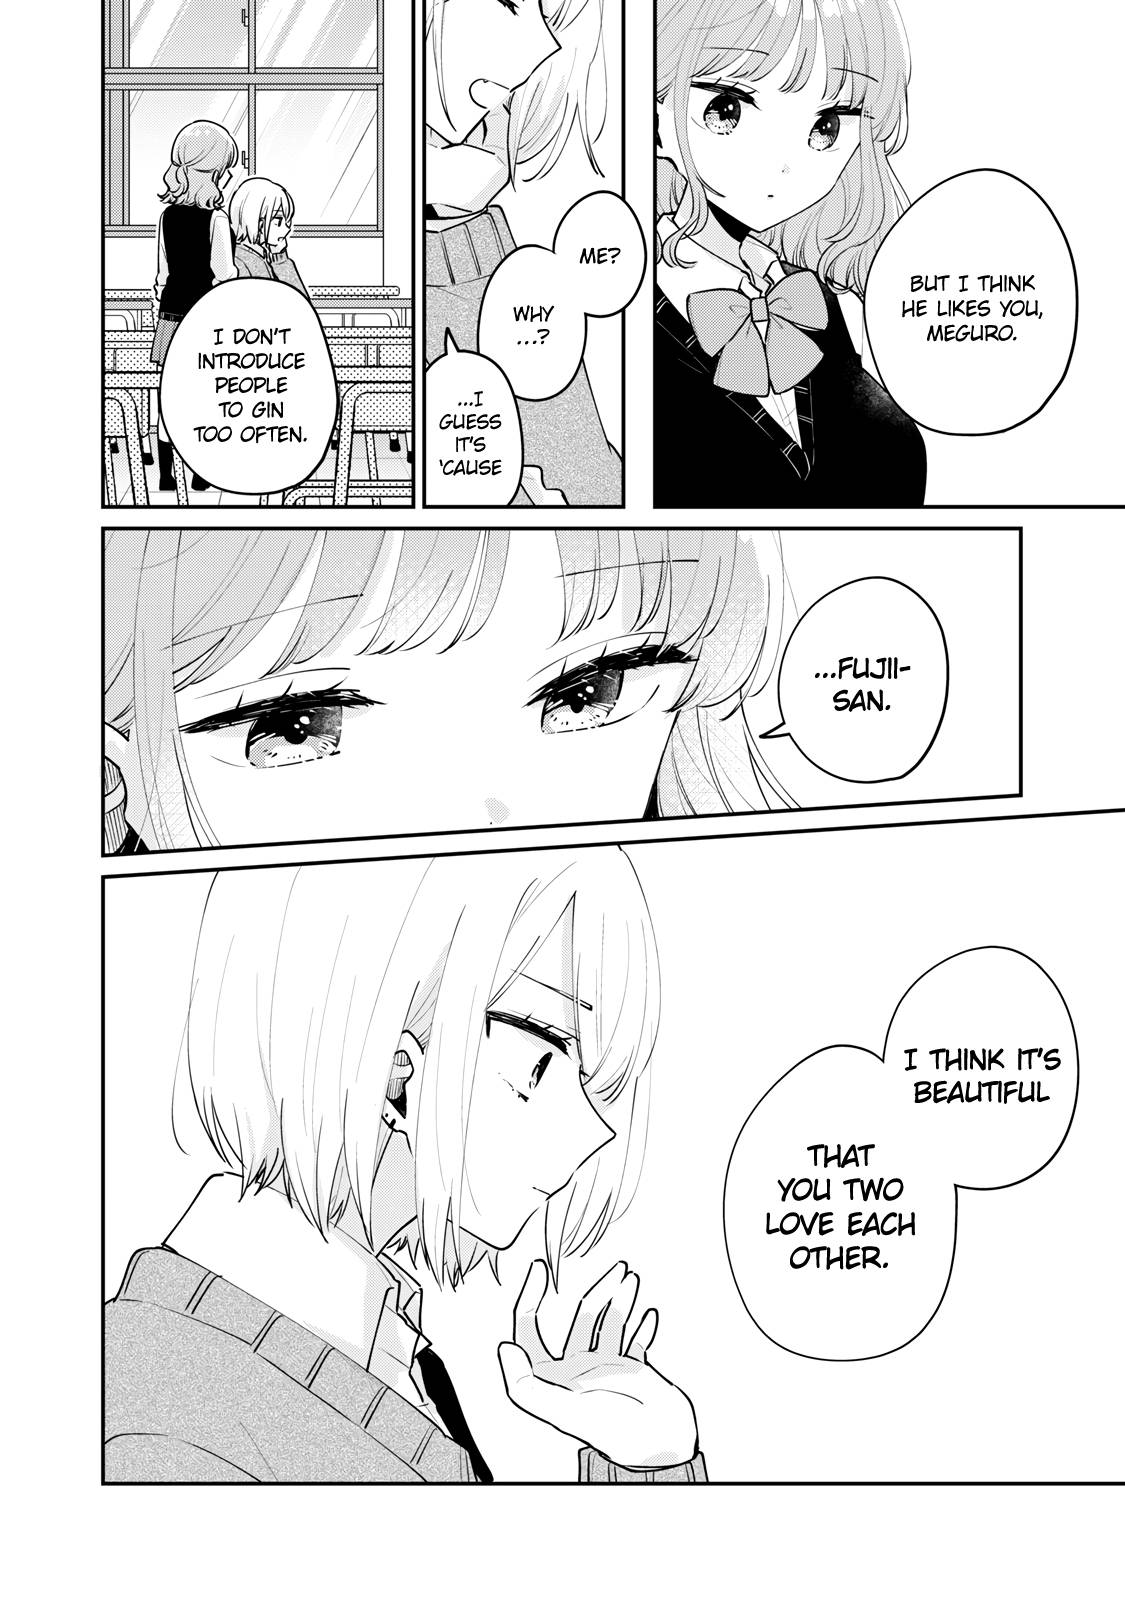 It's Not Meguro-san's First Time chapter 61 page 7